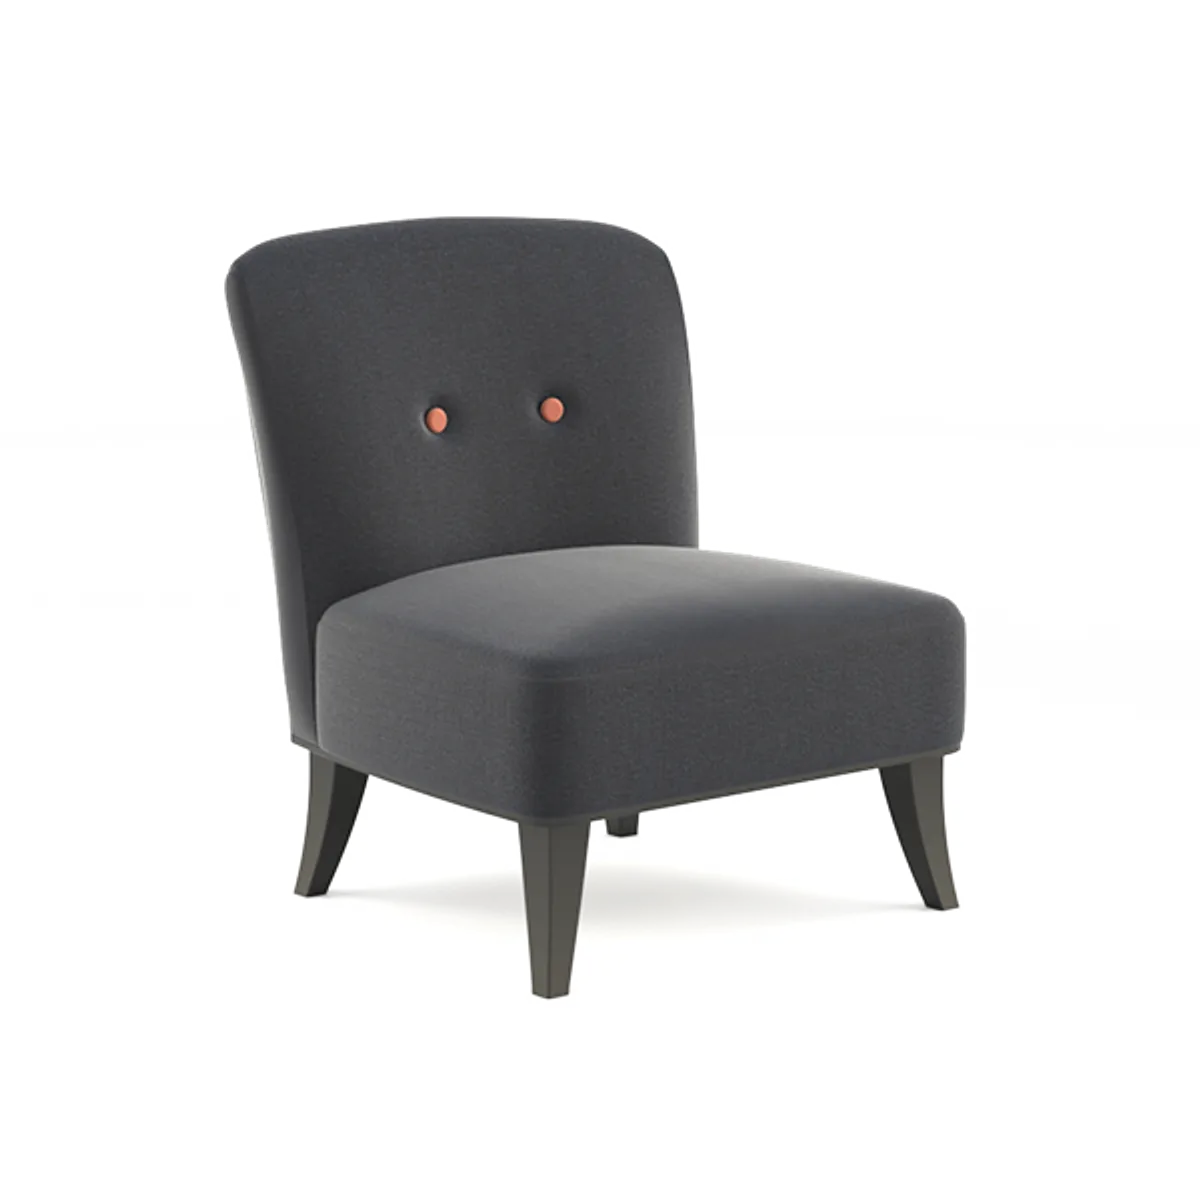 Curzon Chair Bespoke By Inside Out Contracts